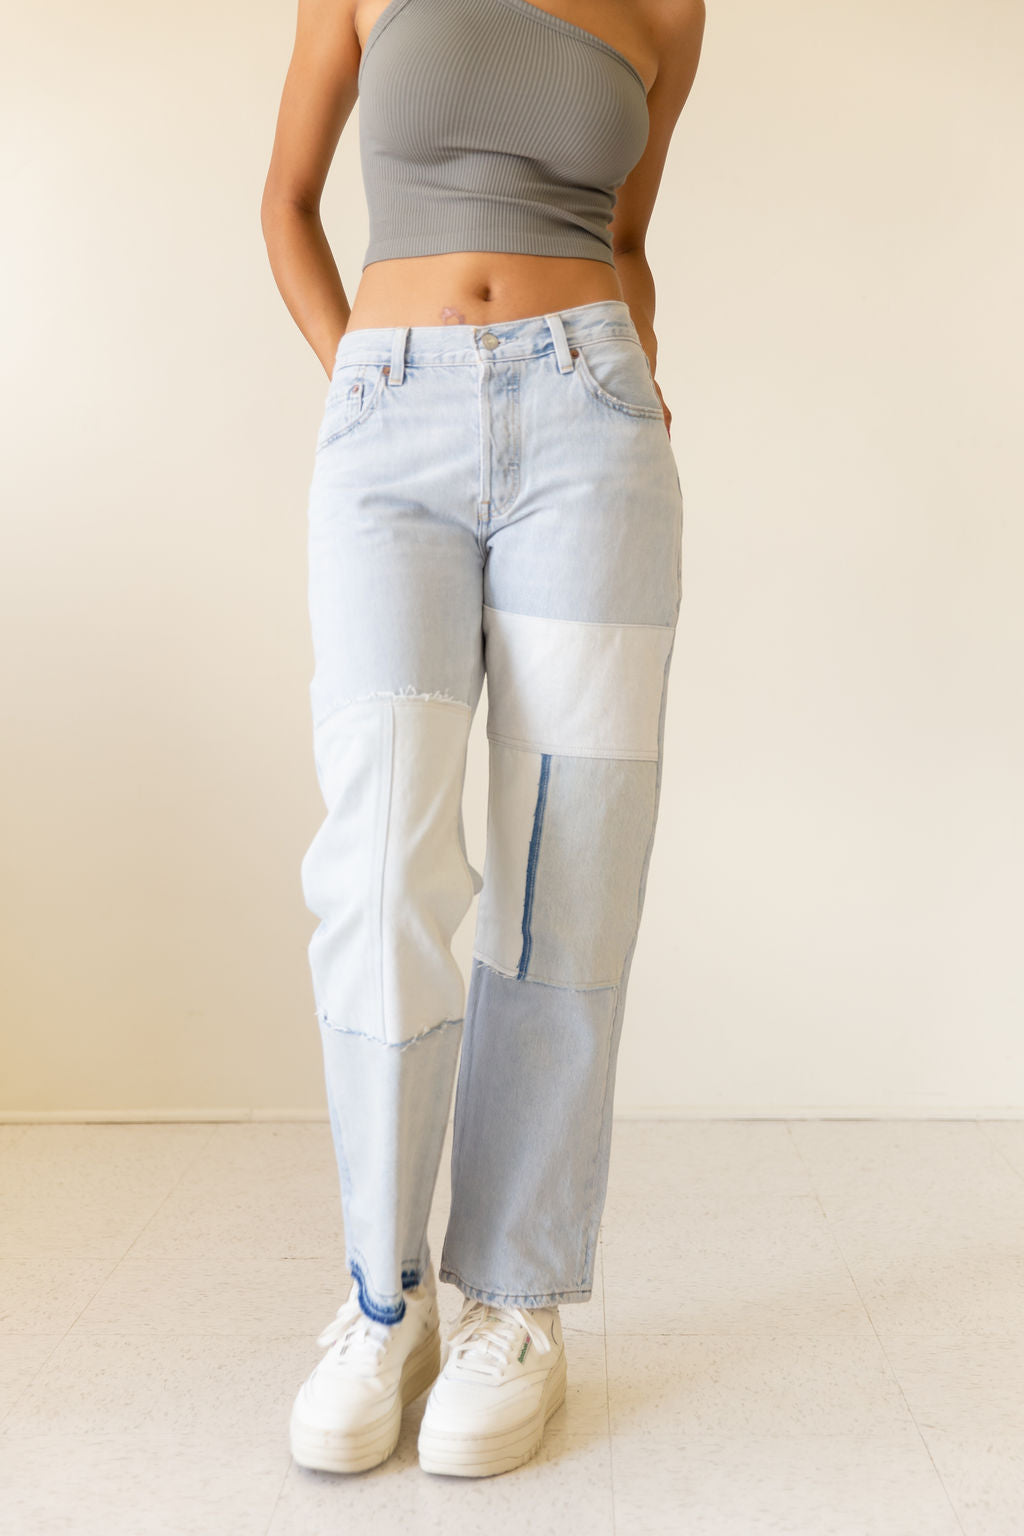 501 90s Freehand Panaled Jeans by Levi's